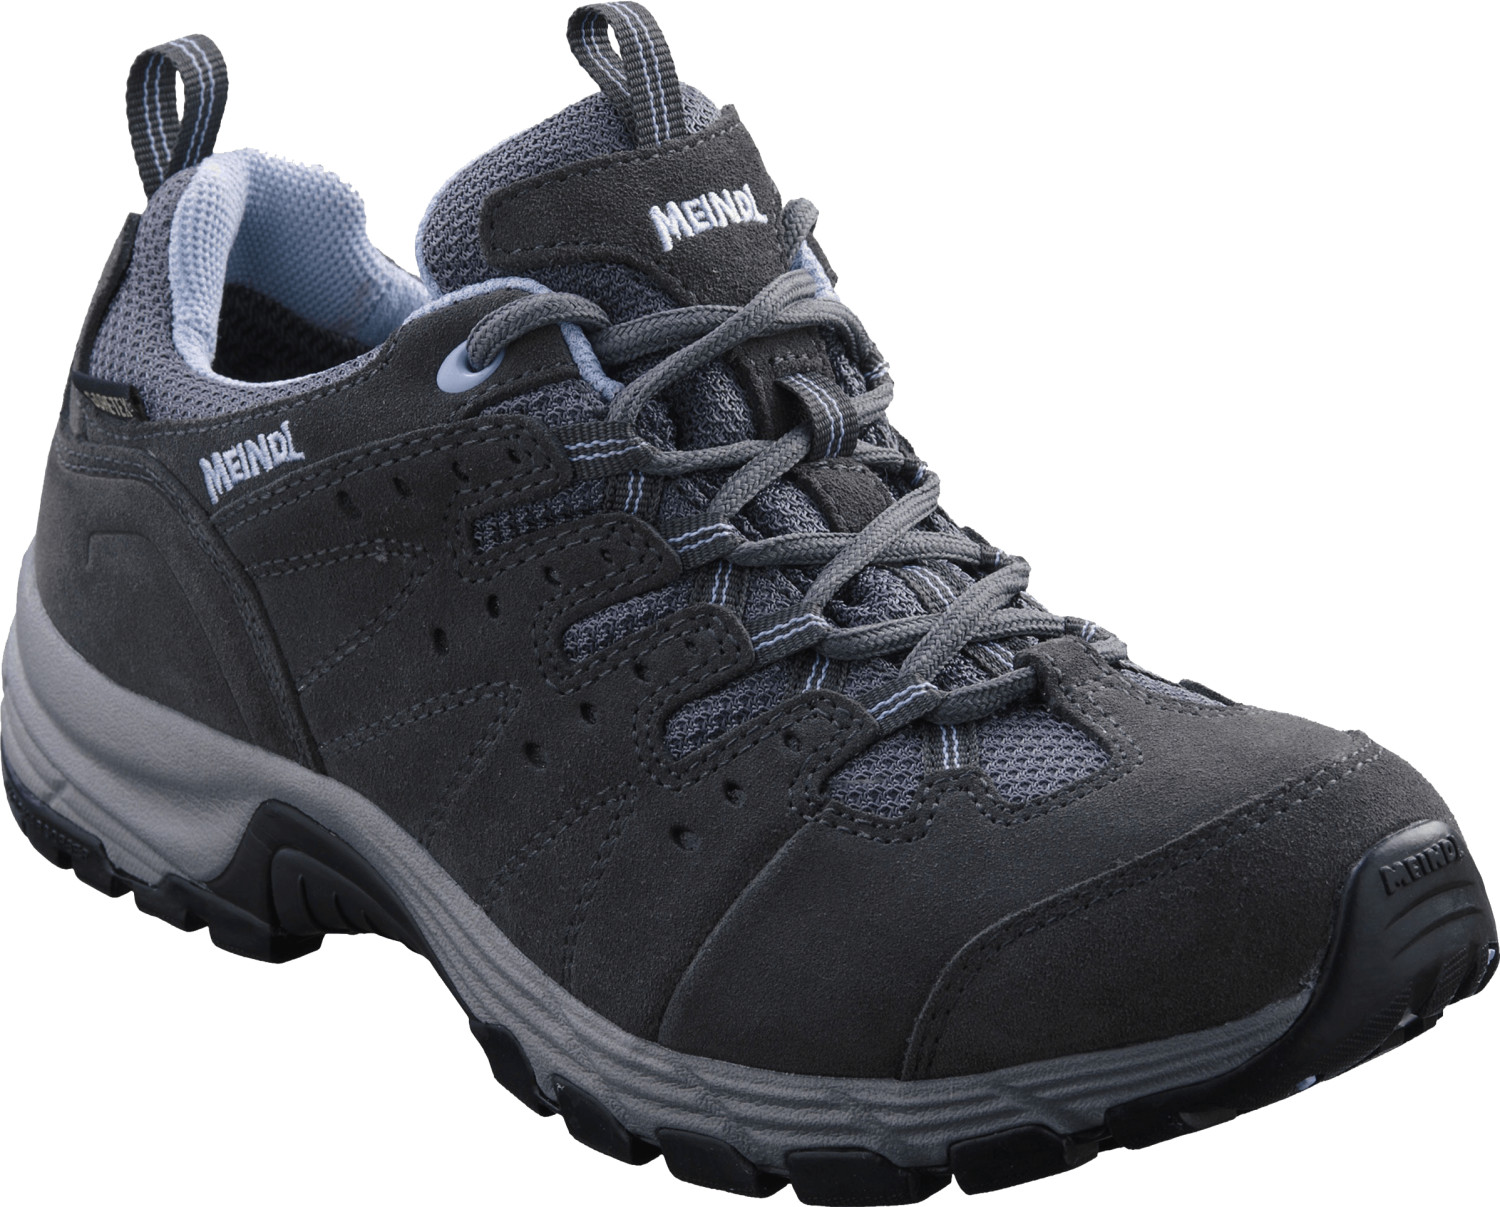 Buy Meindl Rapide Lady GTX anthracite/azure from £184.99 (Today) – Best ...